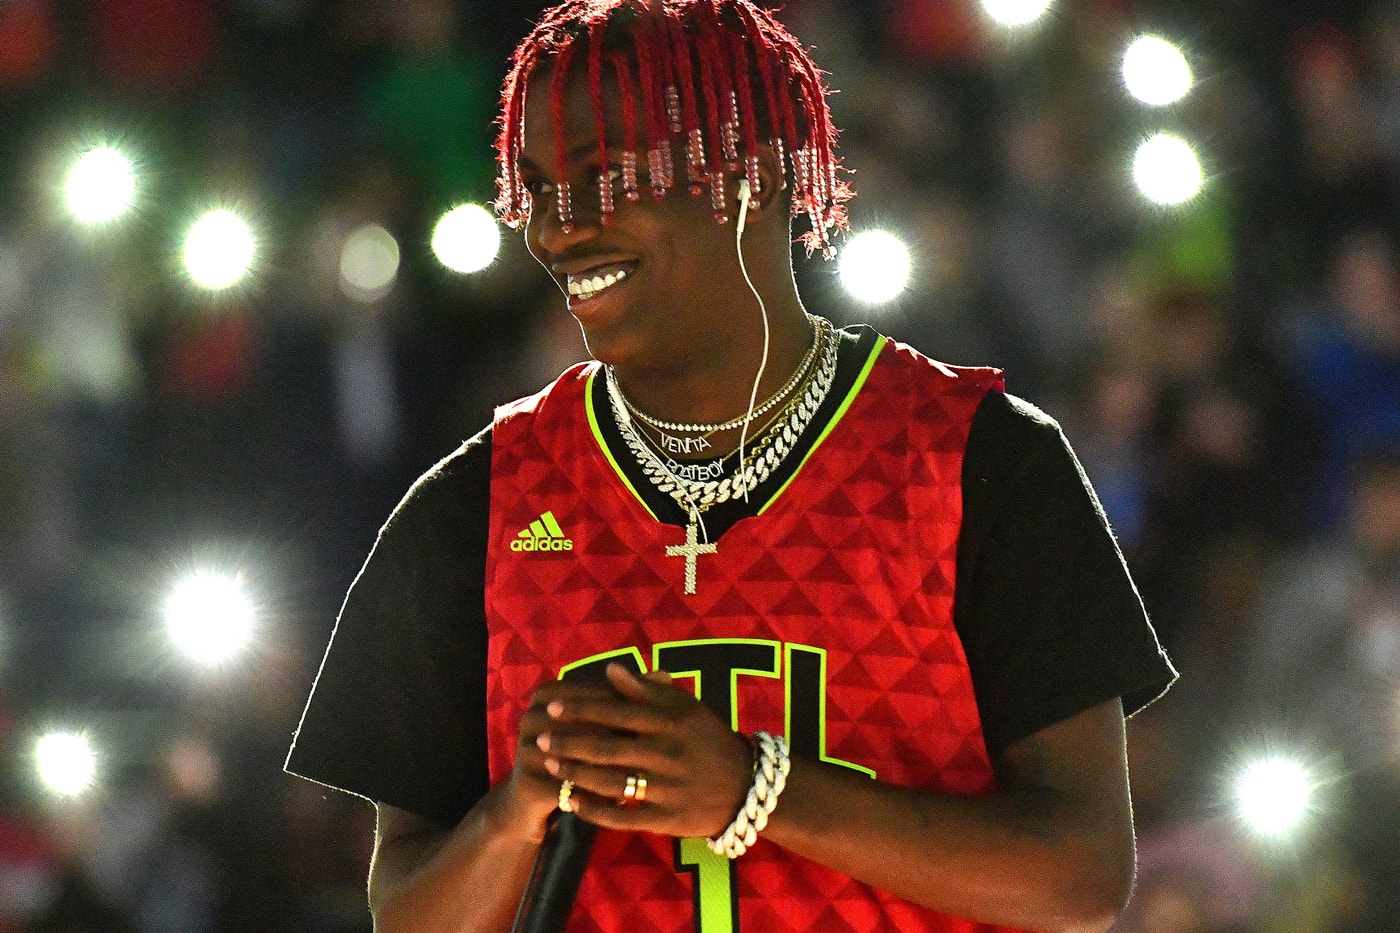 Lil Yachty Most Wanted Song Tracks Lil Boat 2 Rap Hip-Hop Music